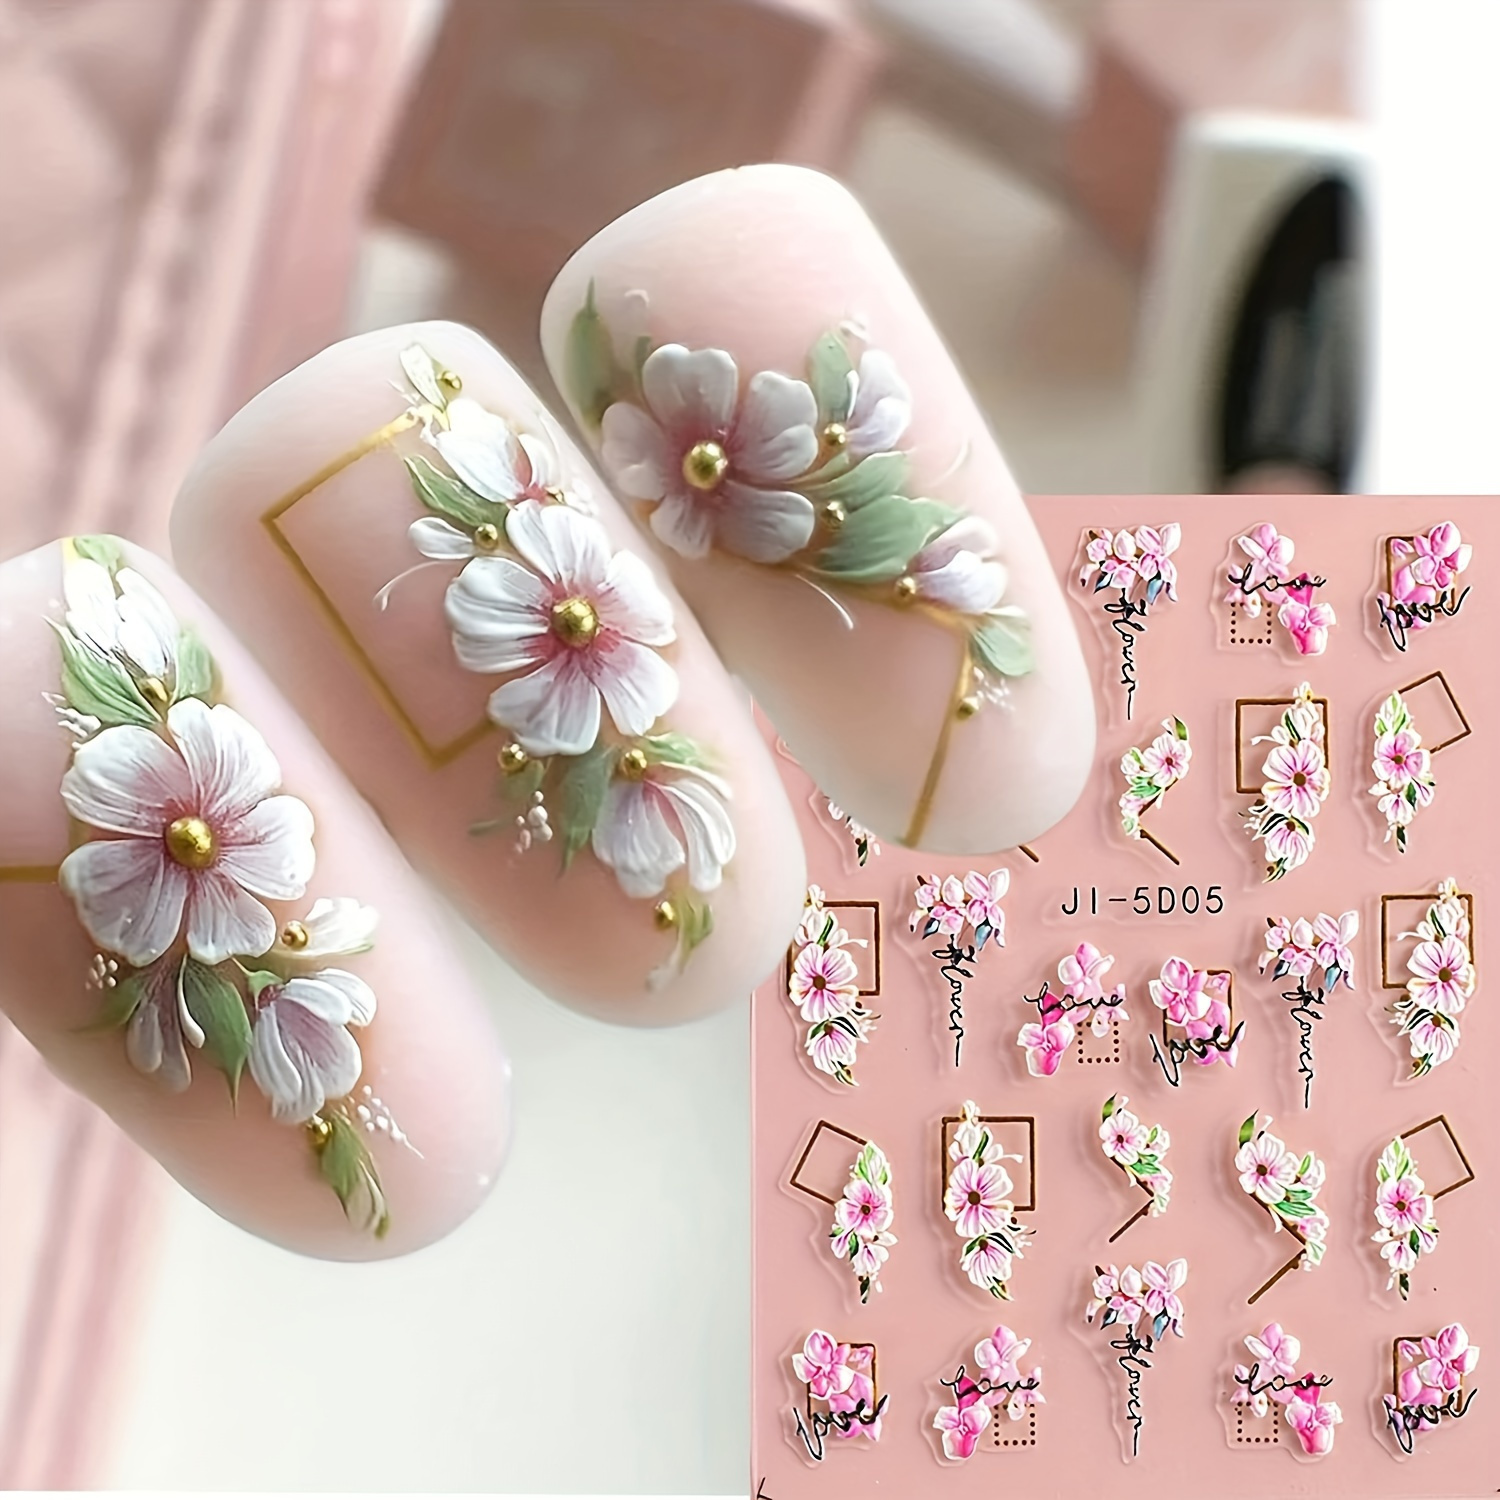 

3 Sheets 5d Embossed Nail Art Stickers Acrylic Embossed Nail Stickers Pink And White Flowers, Leaves, Cherry Adhesive Patches Diy Nail Art Decoration